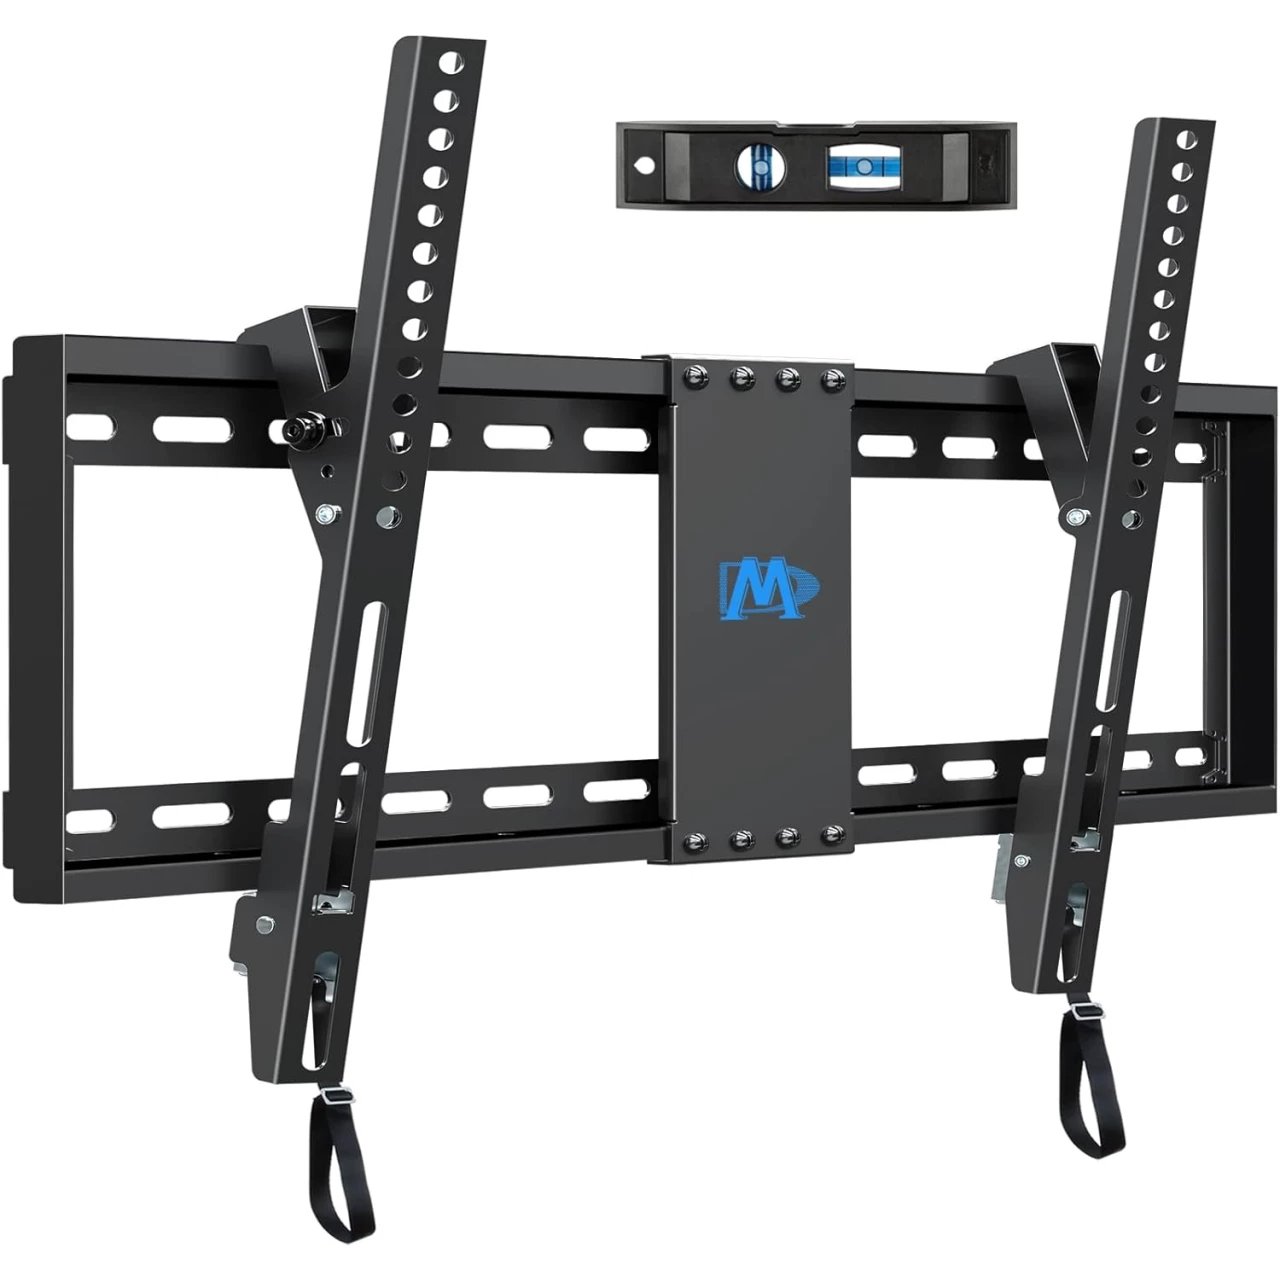 Mounting Dream UL Listed TV Mount for Most 37-70 Inch TV, Universal Tilt TV Wall Mount